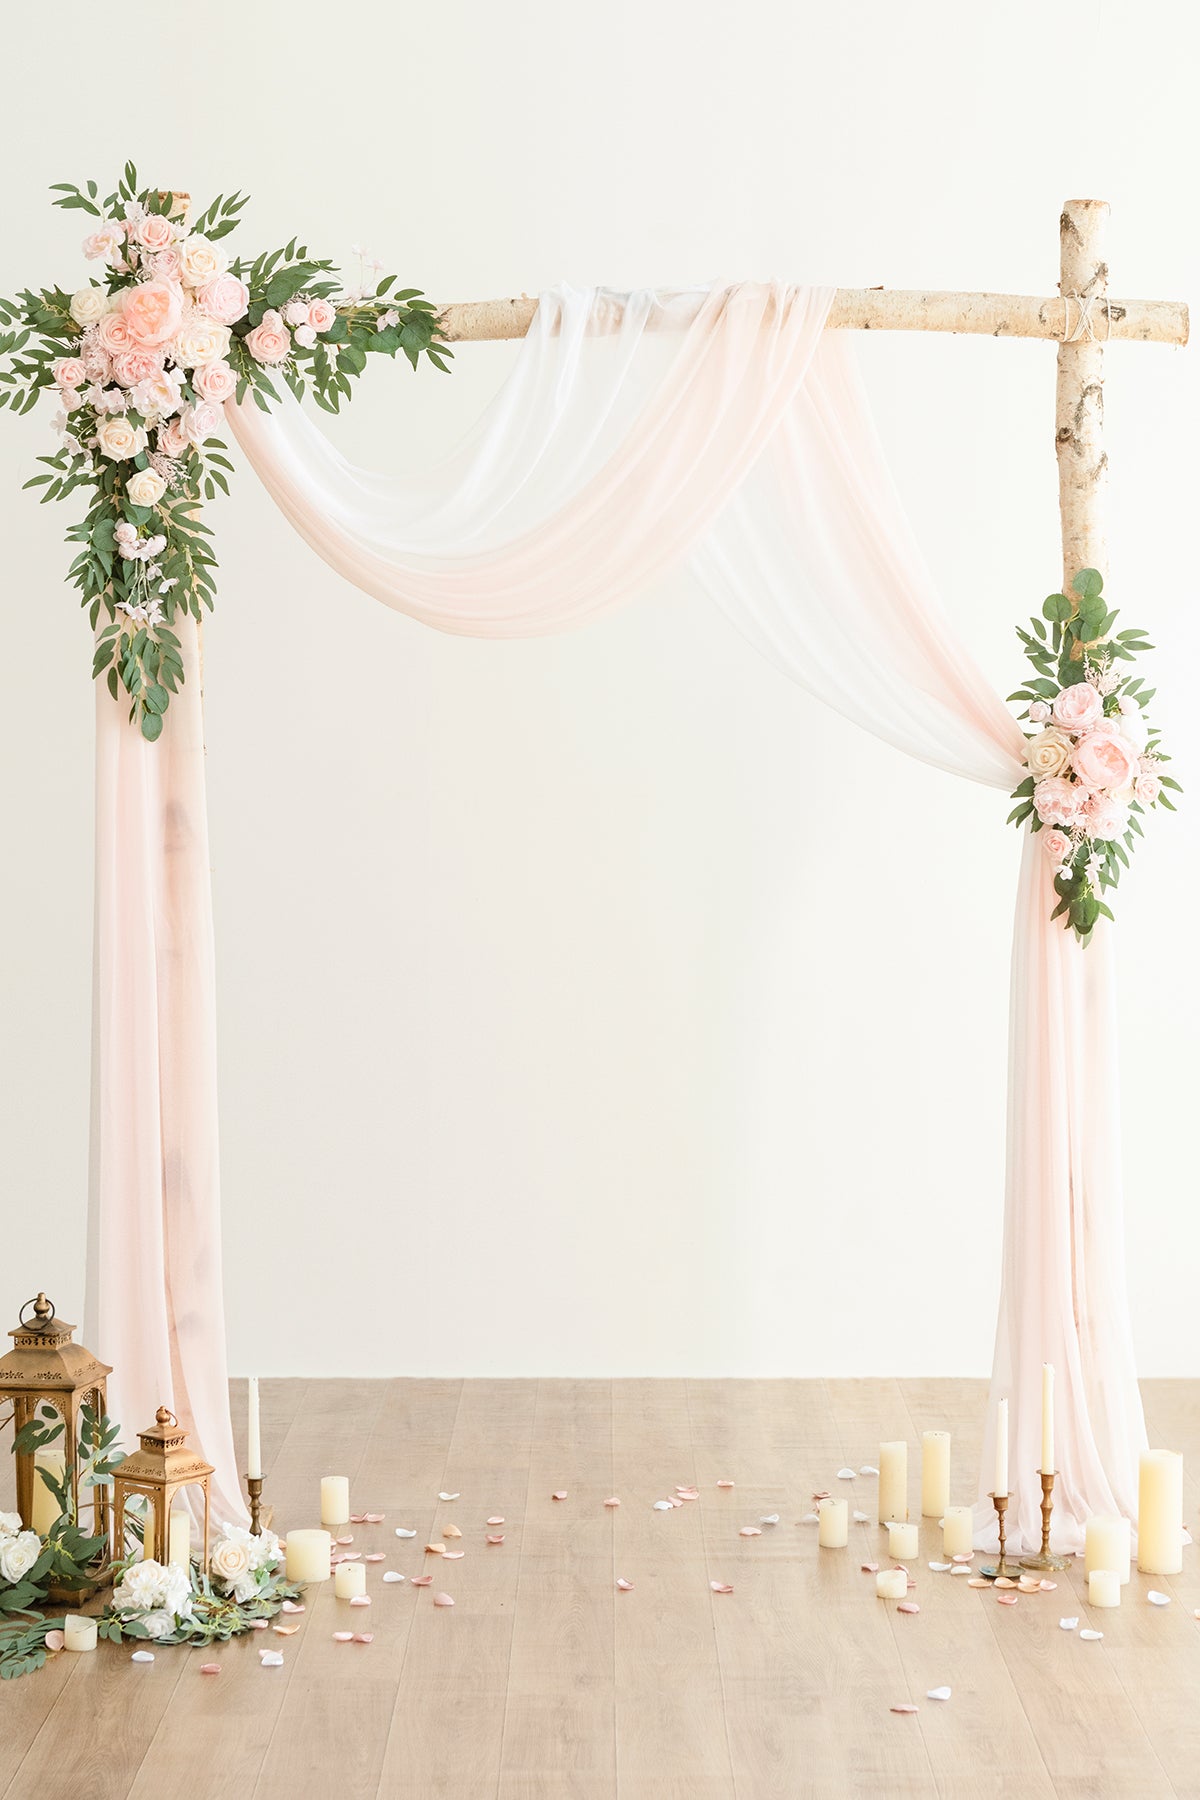 Flower Arch Decor with Drapes in Blush & Cream| Clearance